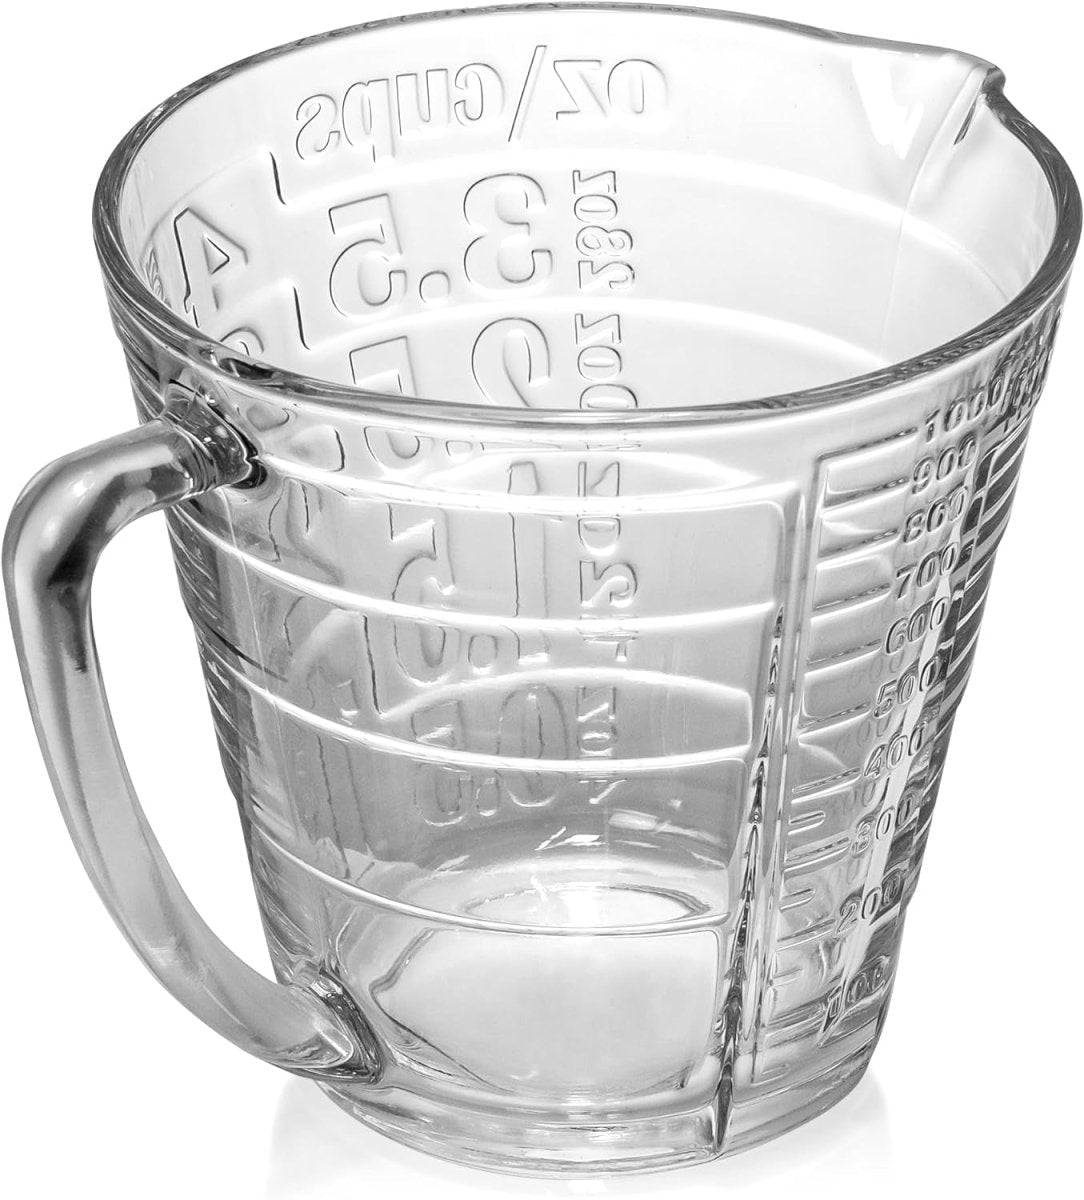 Premium Quality Glass Measuring Cup with Large Handle - 32 Ounce(1000Ml.) - Shiny Nails